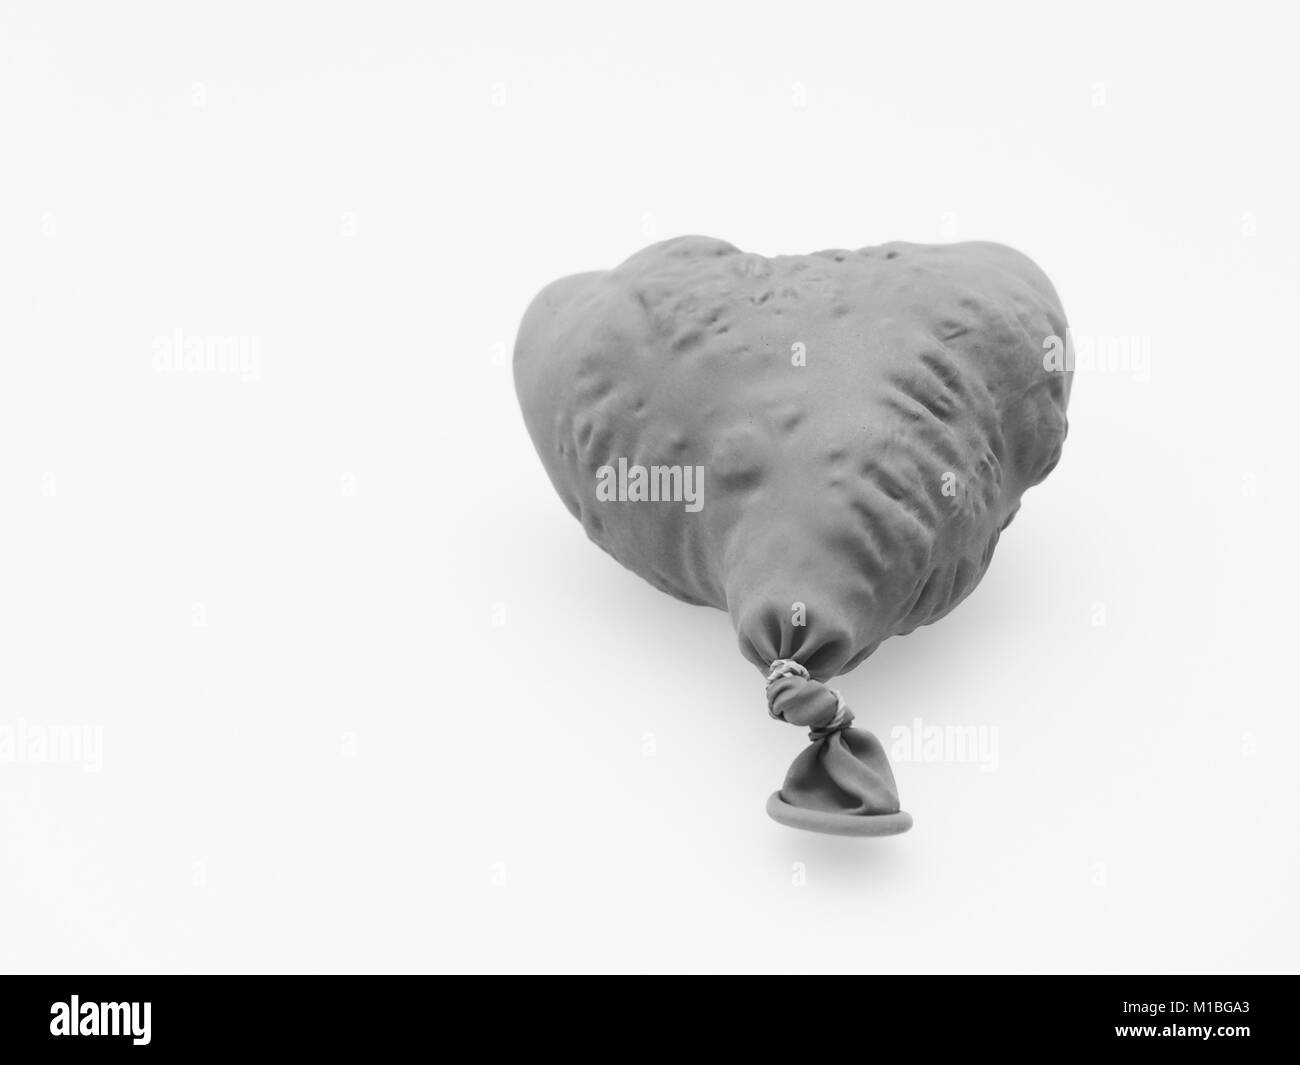 Deflate heart shape balloon in black and white isolated on white background Stock Photo